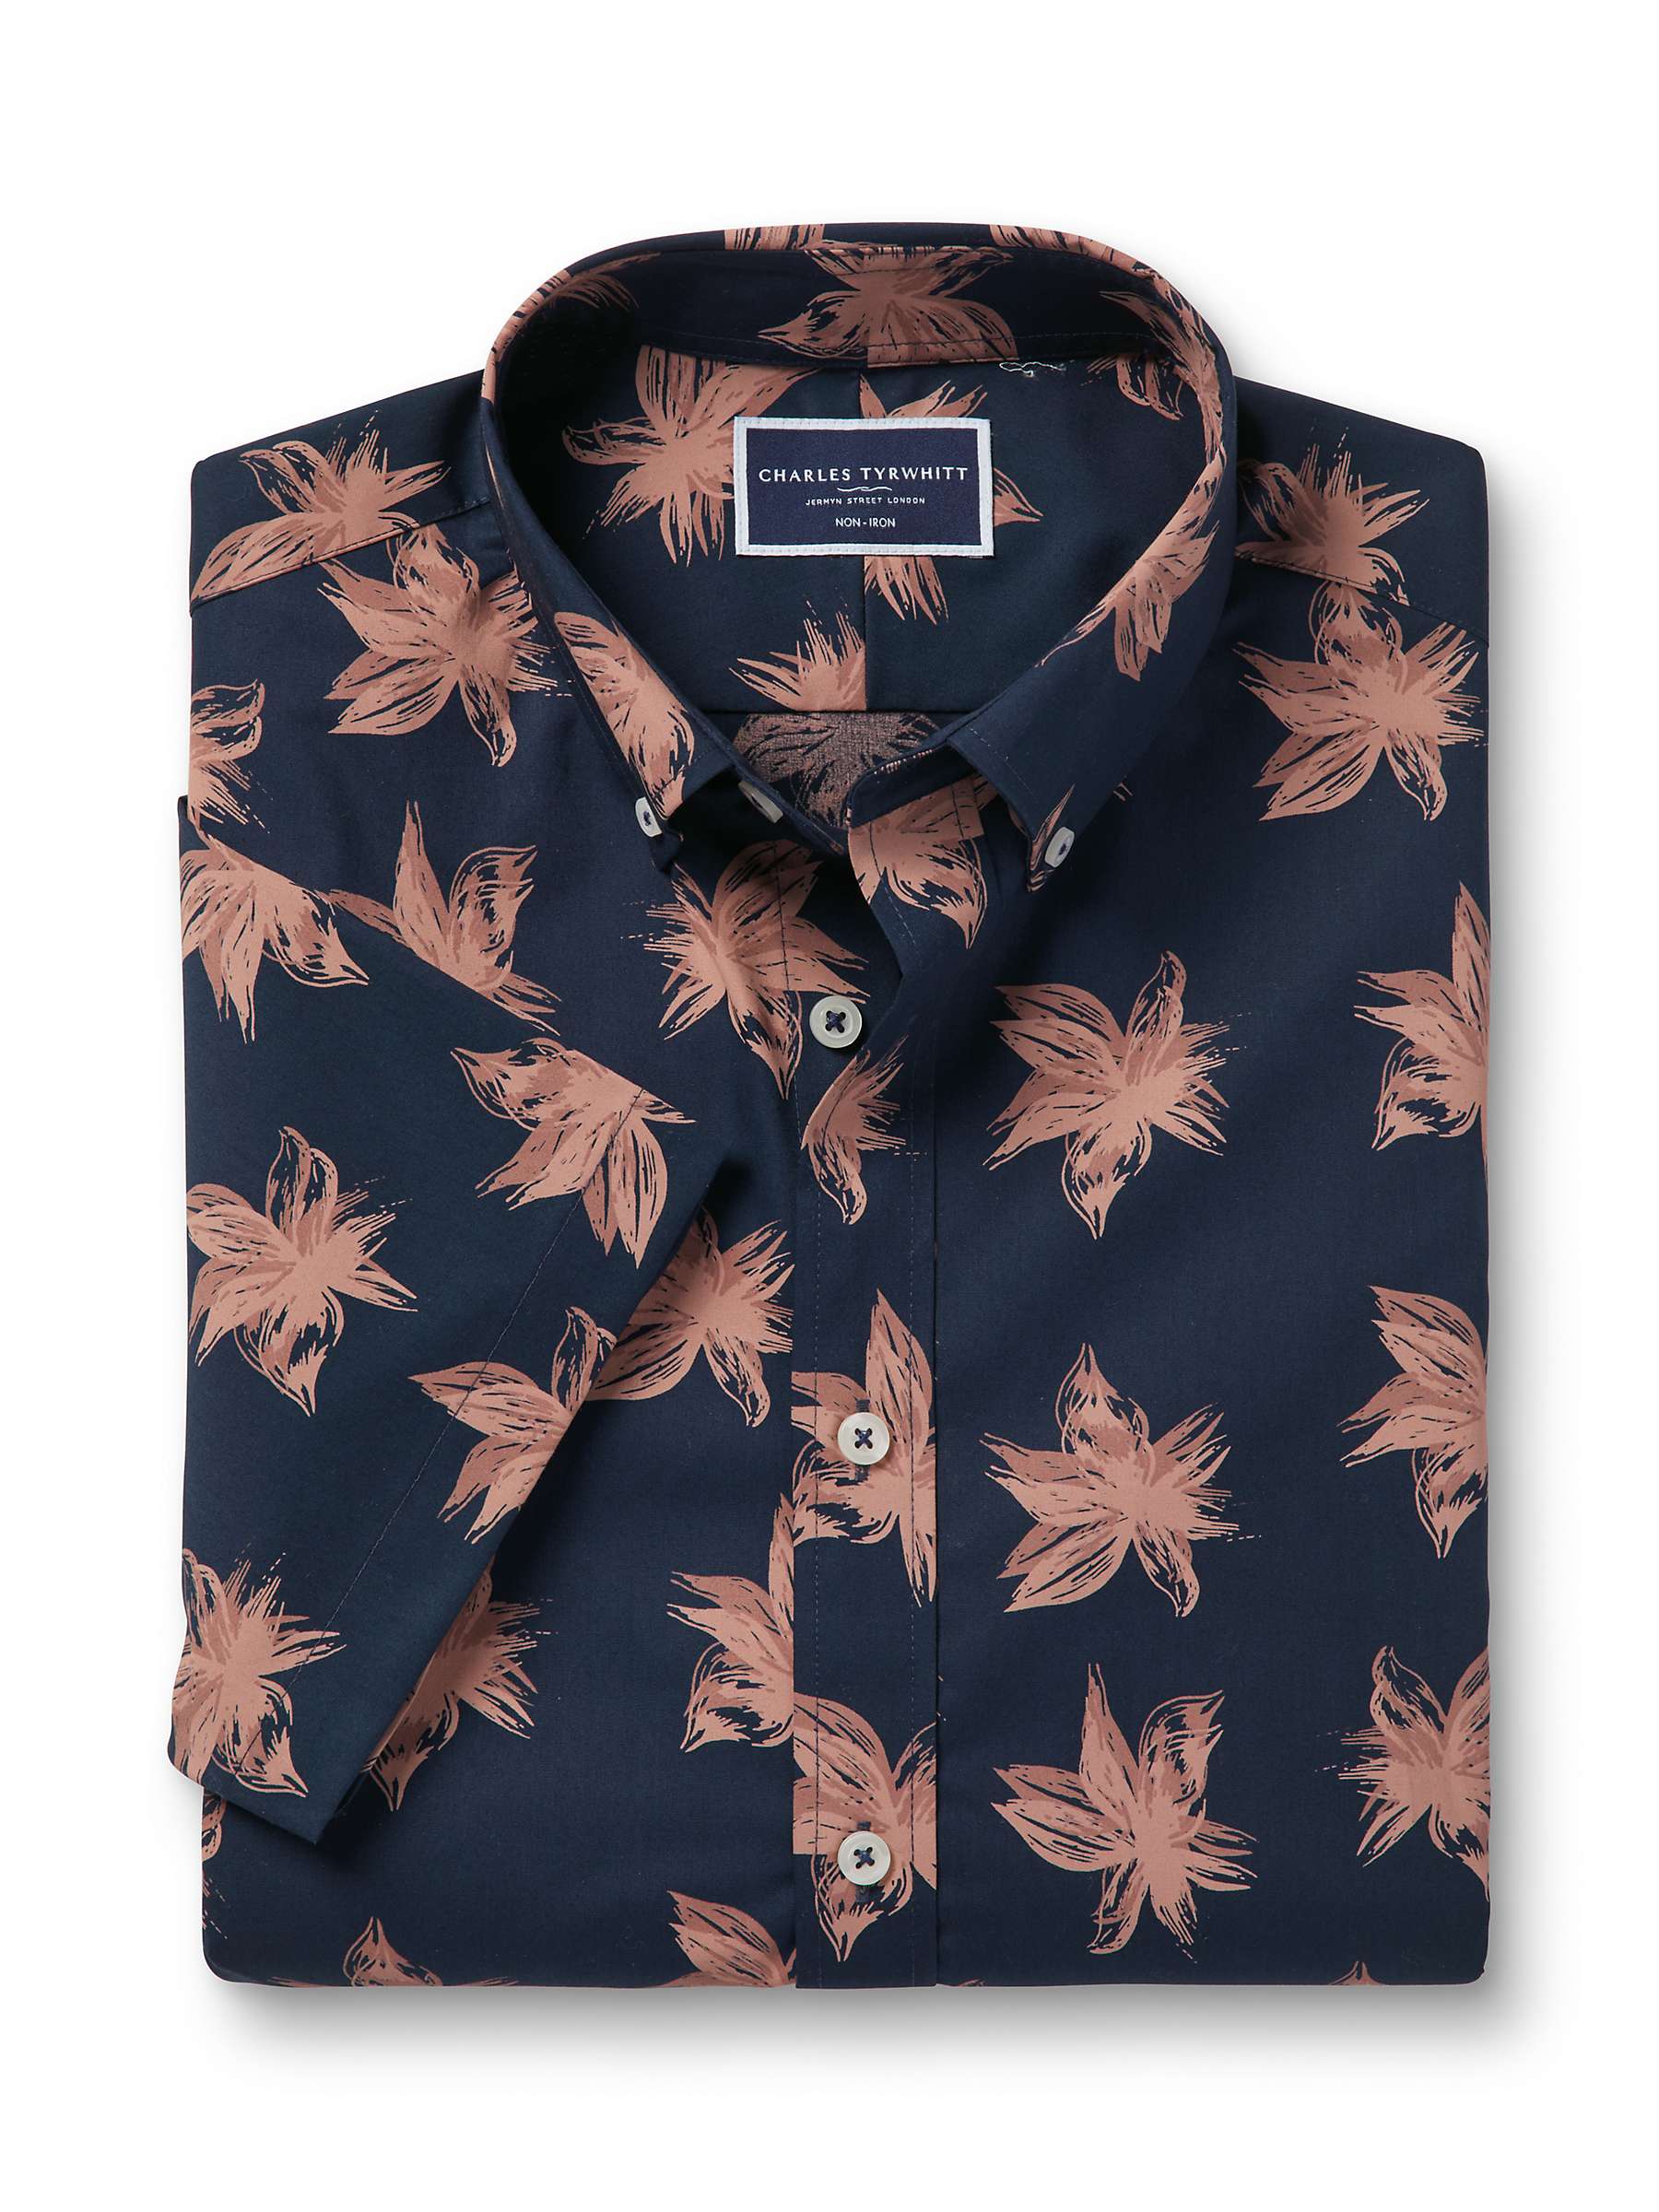 Buy Charles Tyrwhitt Slim Fit Large Floral Non-Iron Stretch Shirt, Navy Online at johnlewis.com